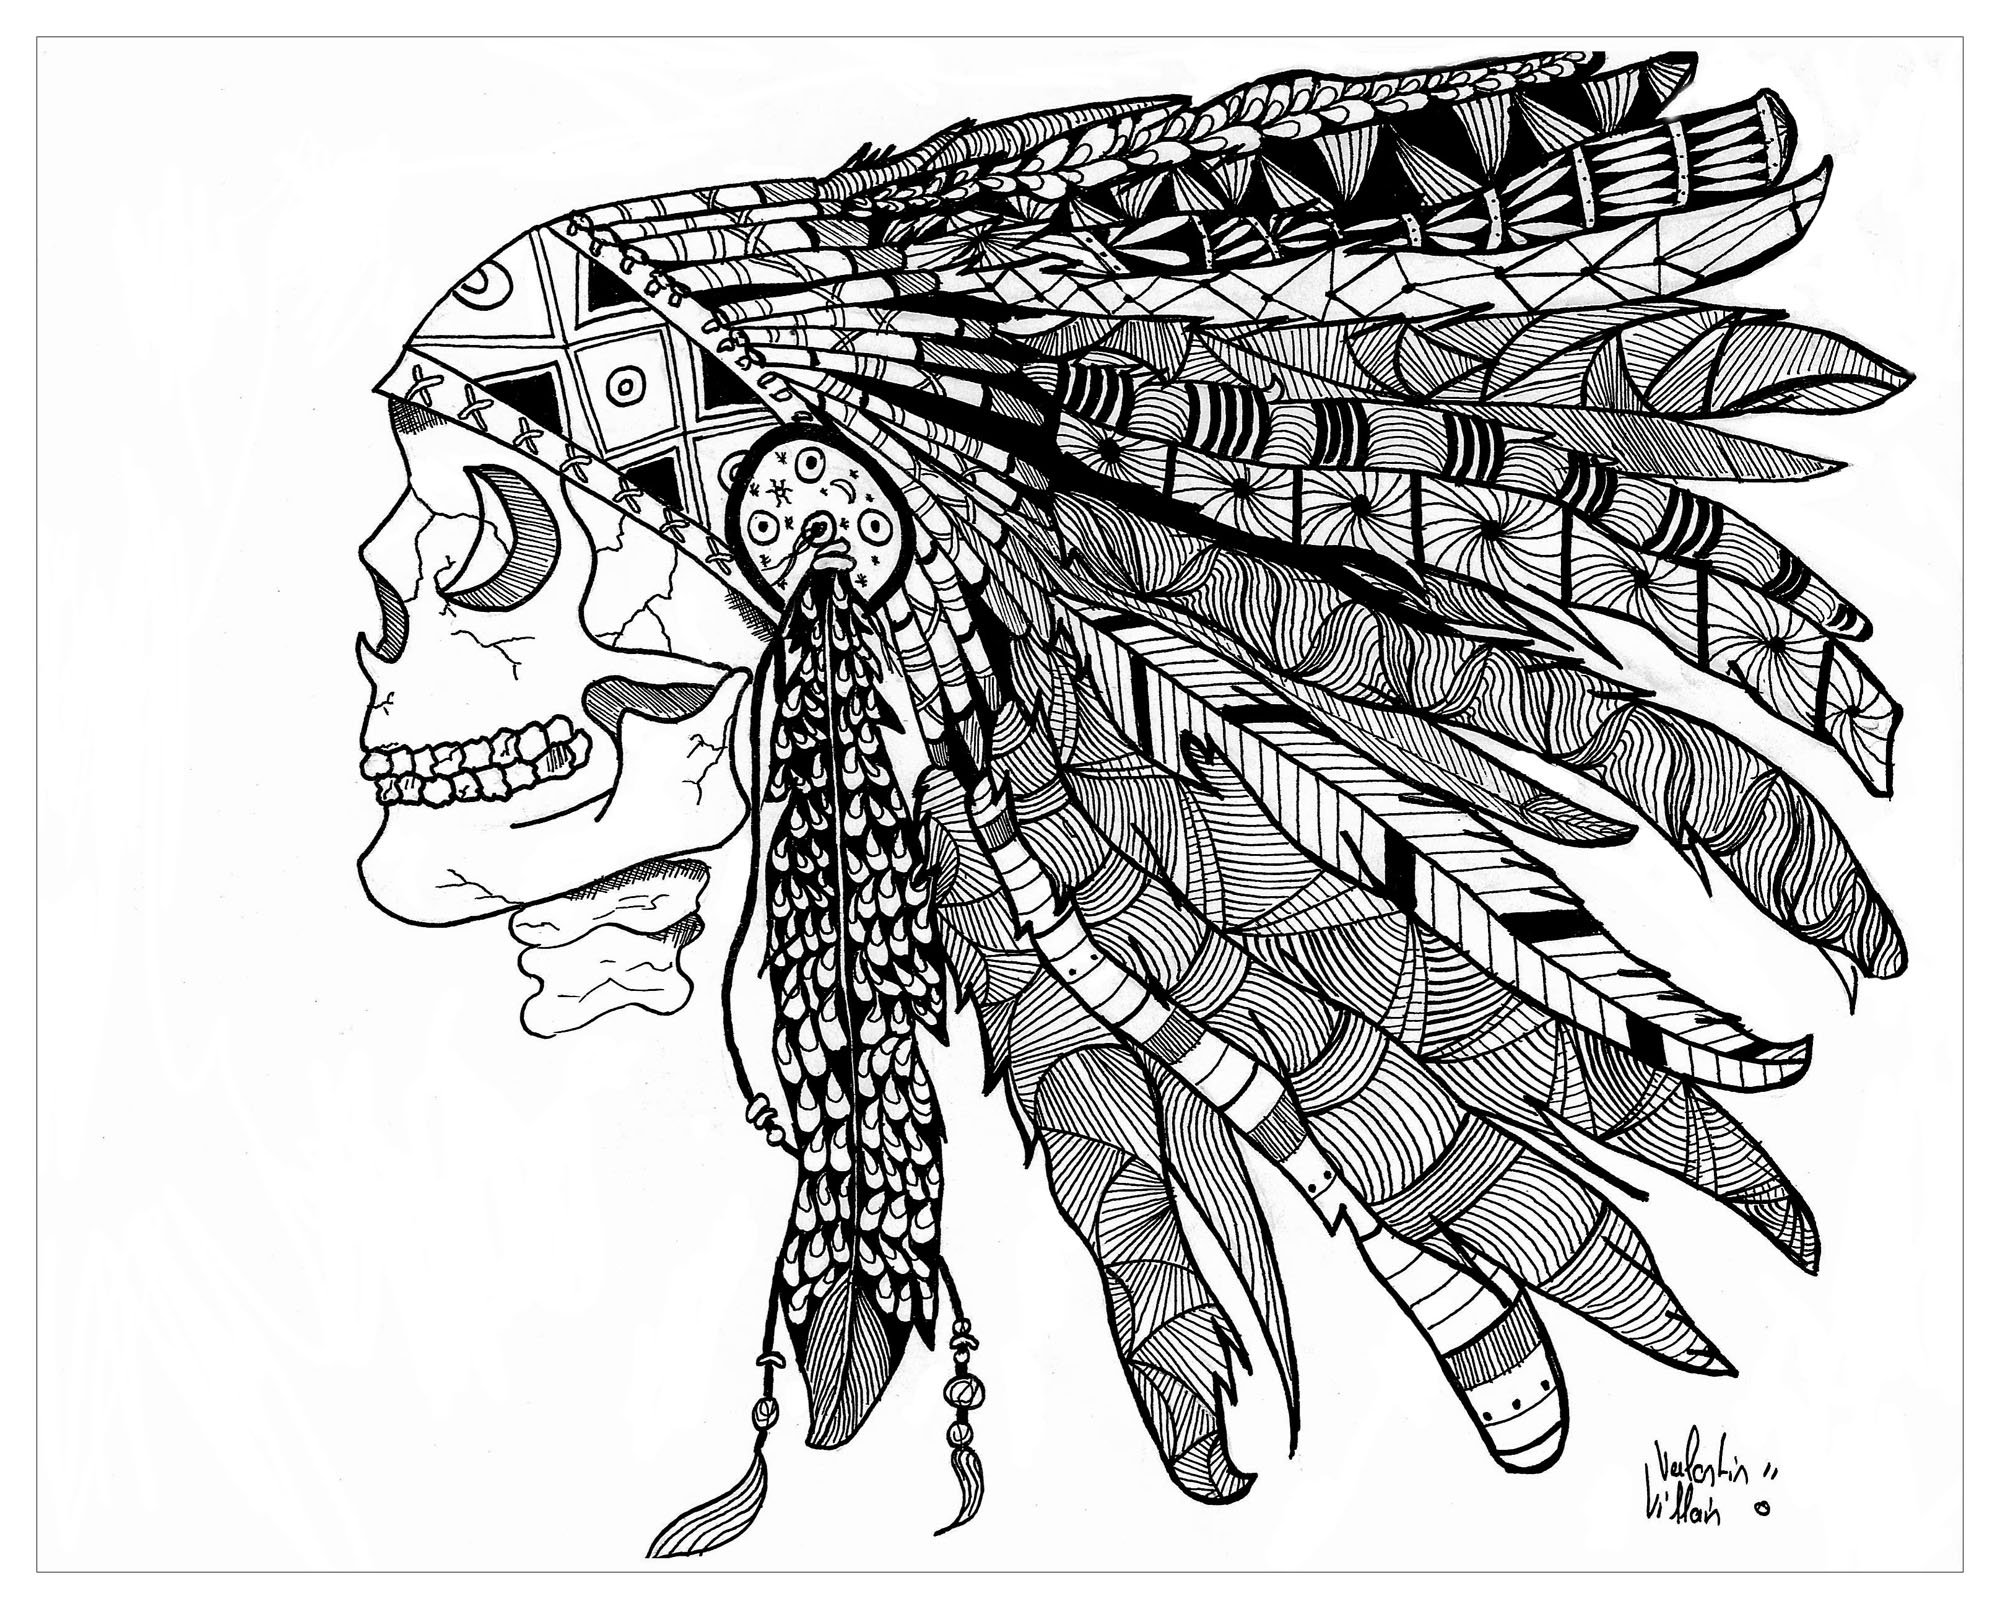 Zentangle drawing representing a Indian / Native American Skull, Artist : Valentin